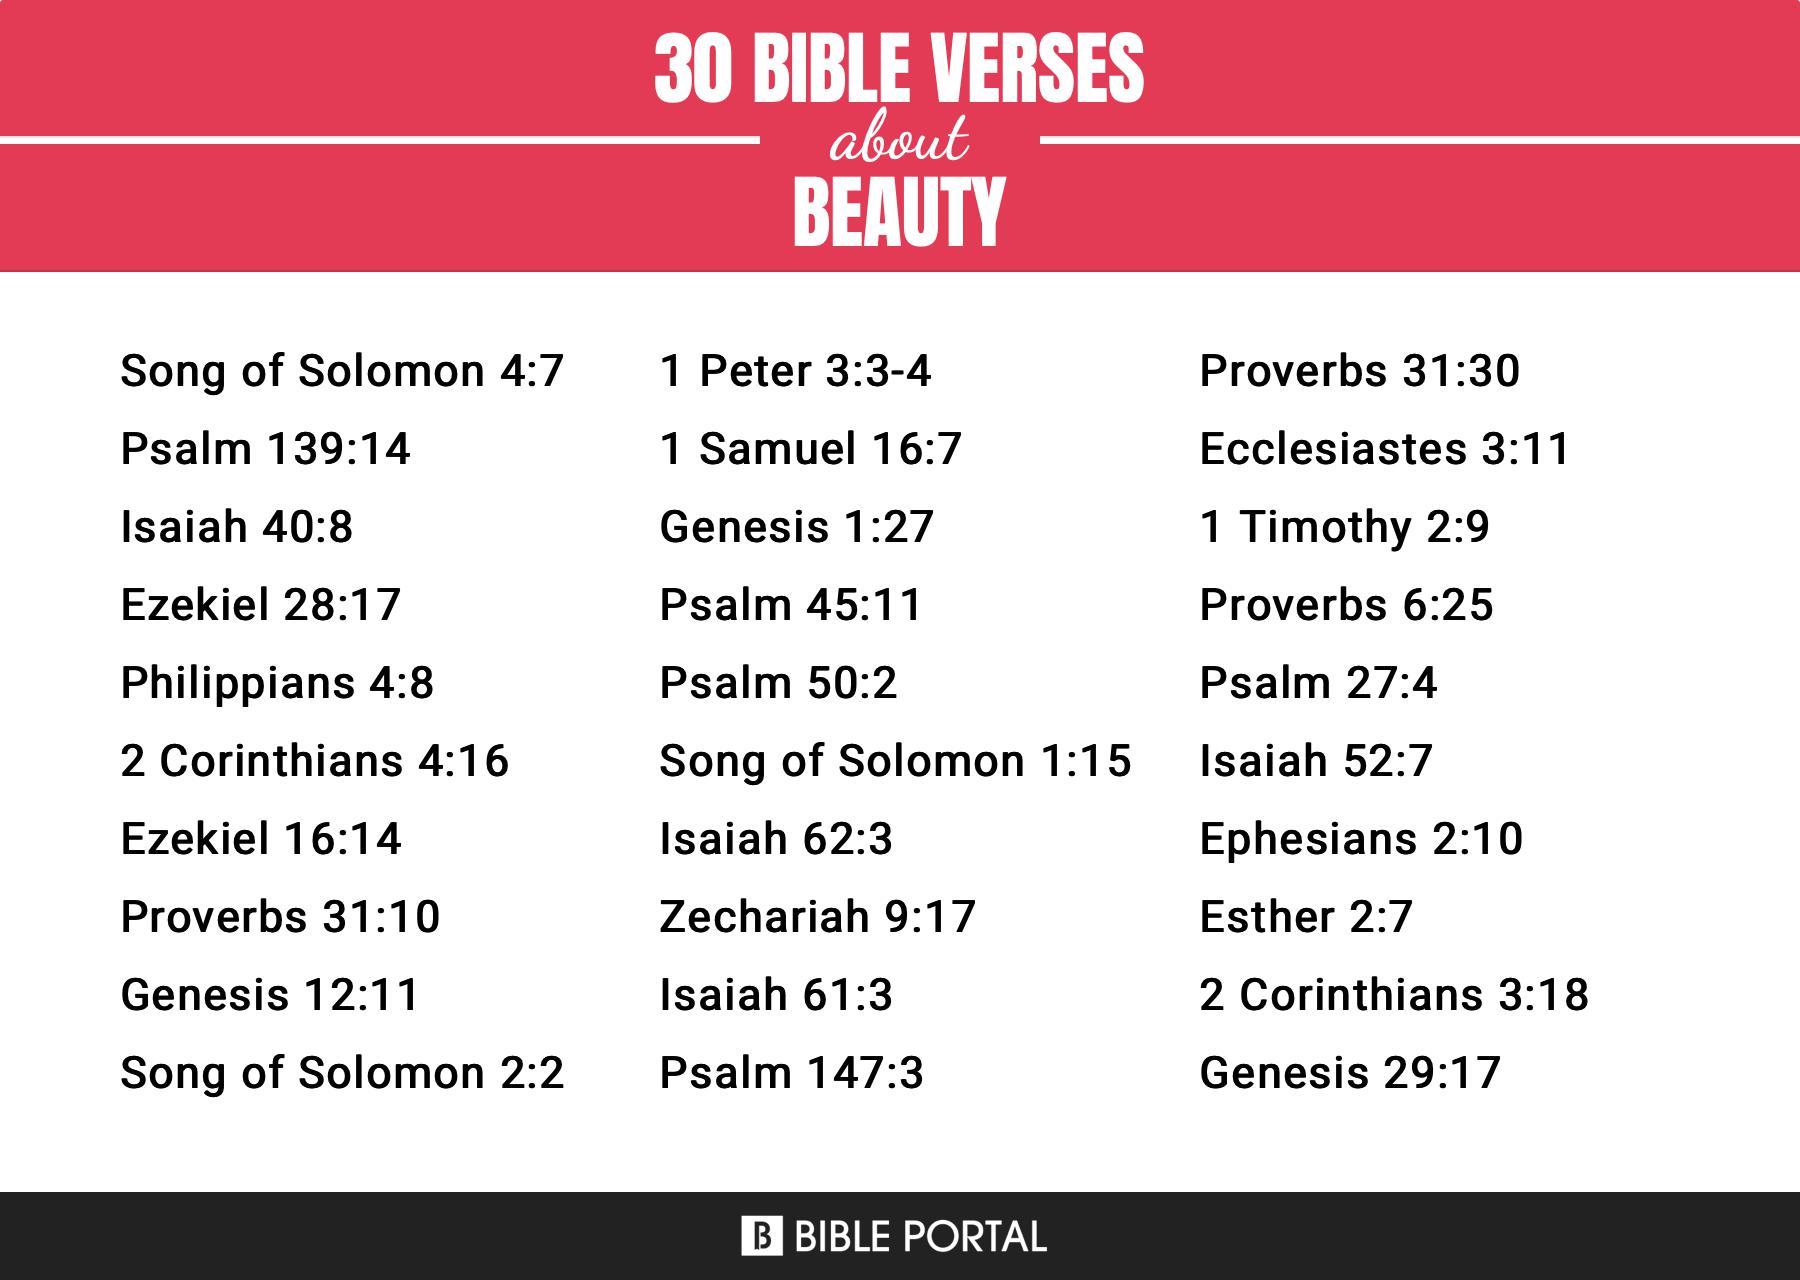 What Does the Bible Say about Beauty?